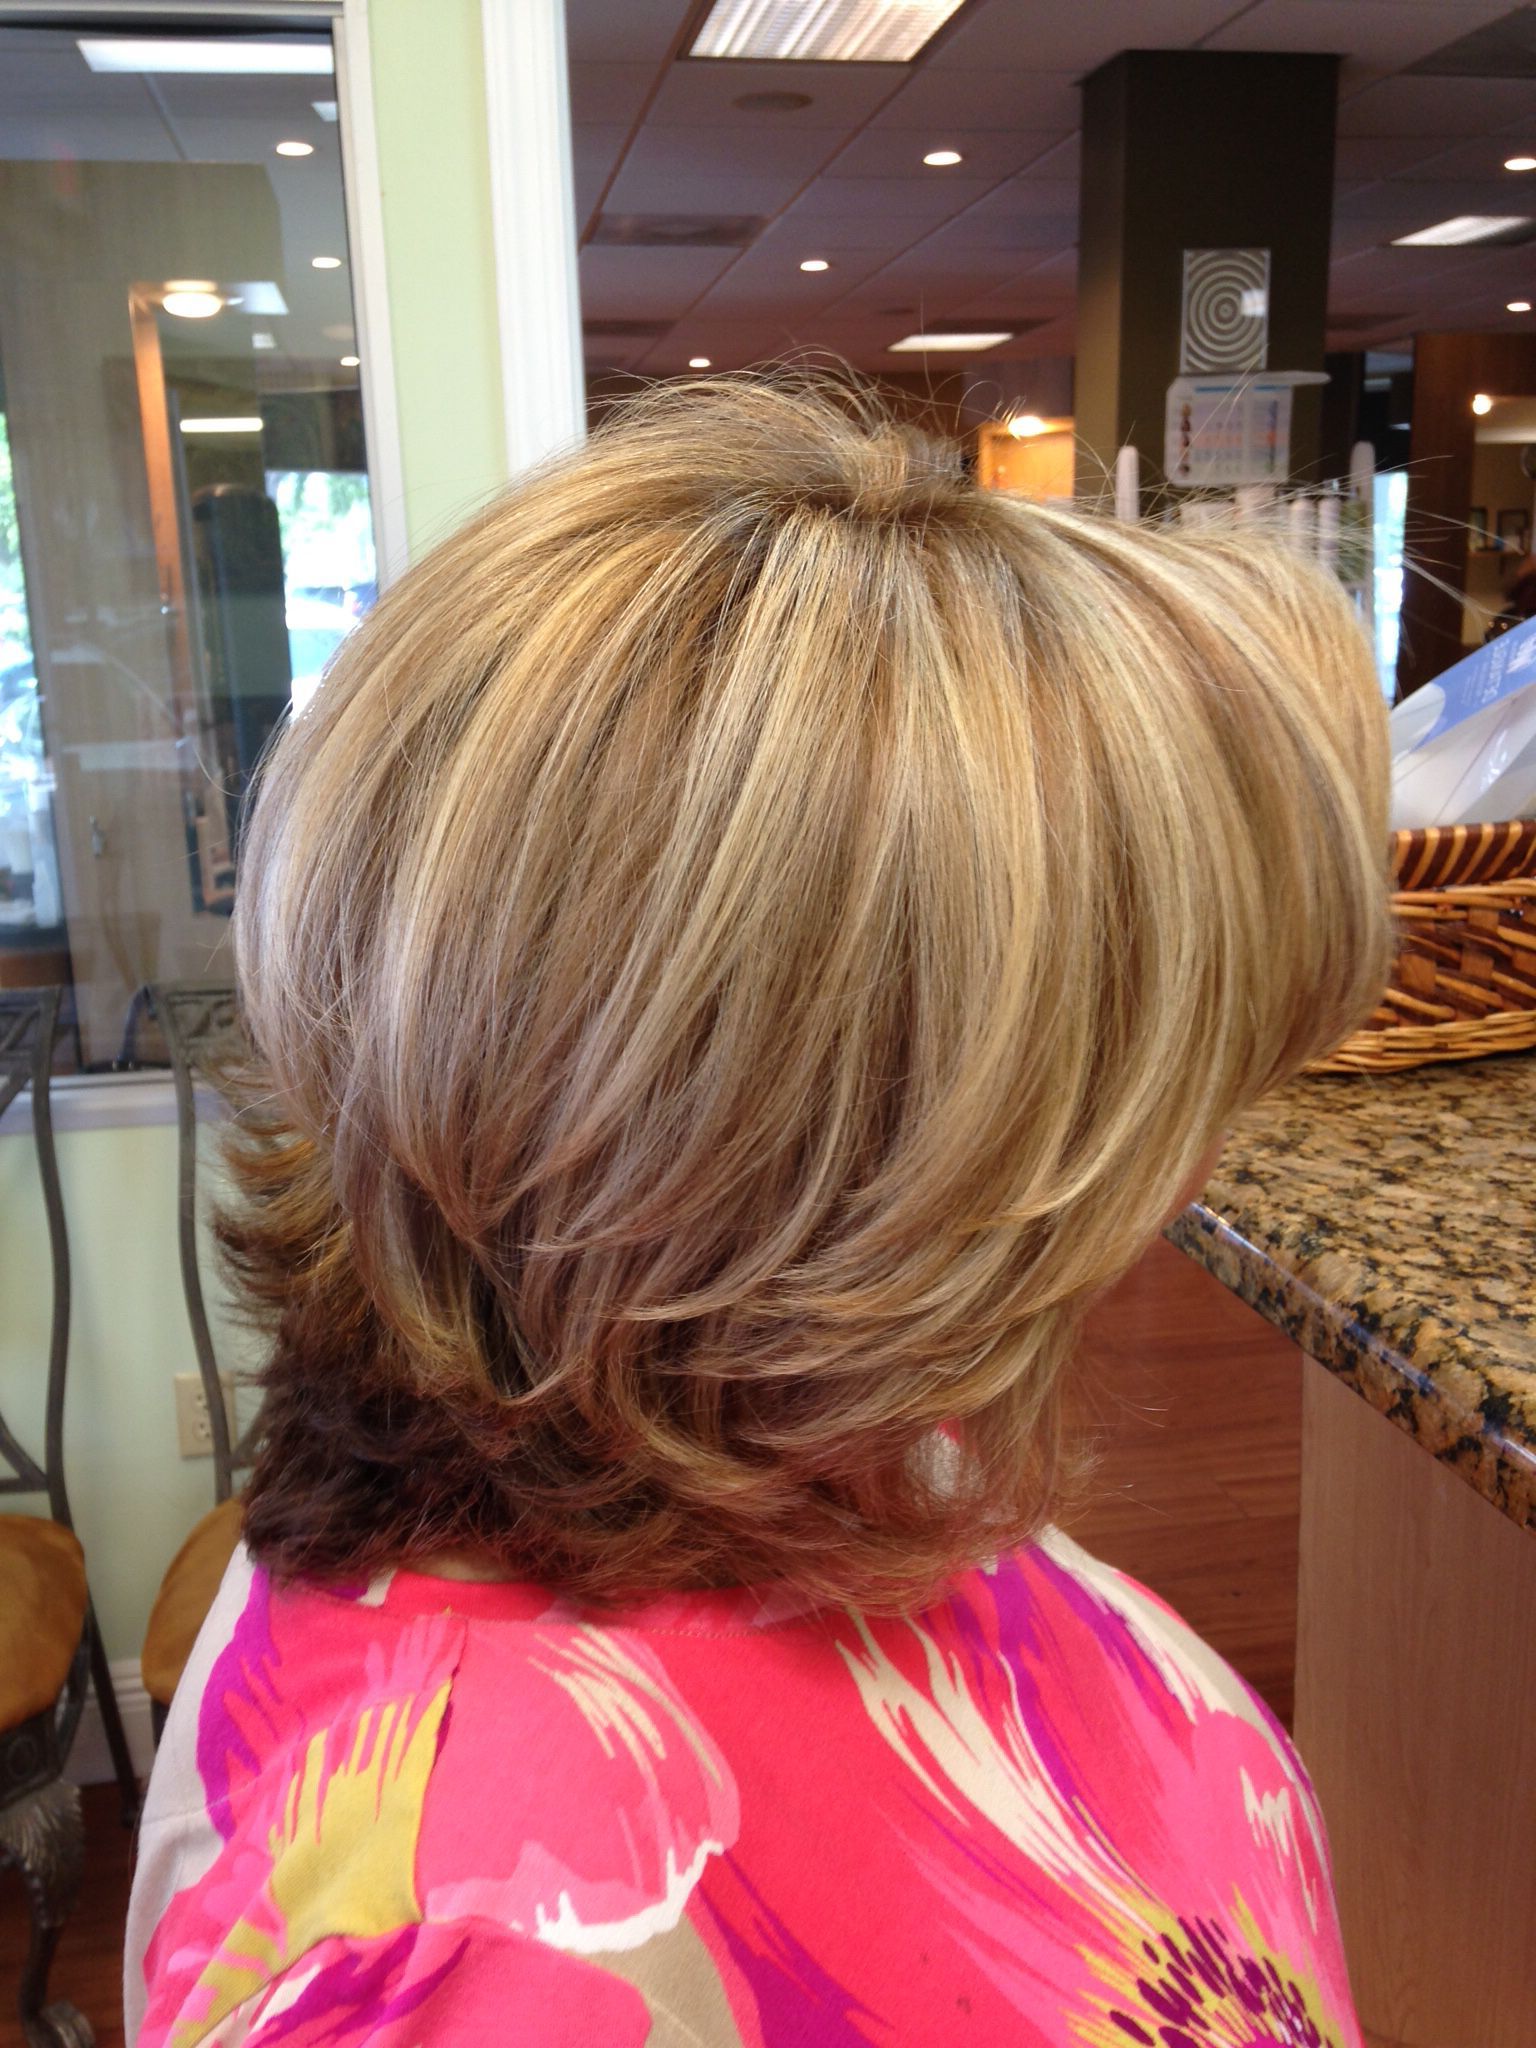 Lots Of Layers And Highlights For This Beauty's Hair (View 22 of 25)